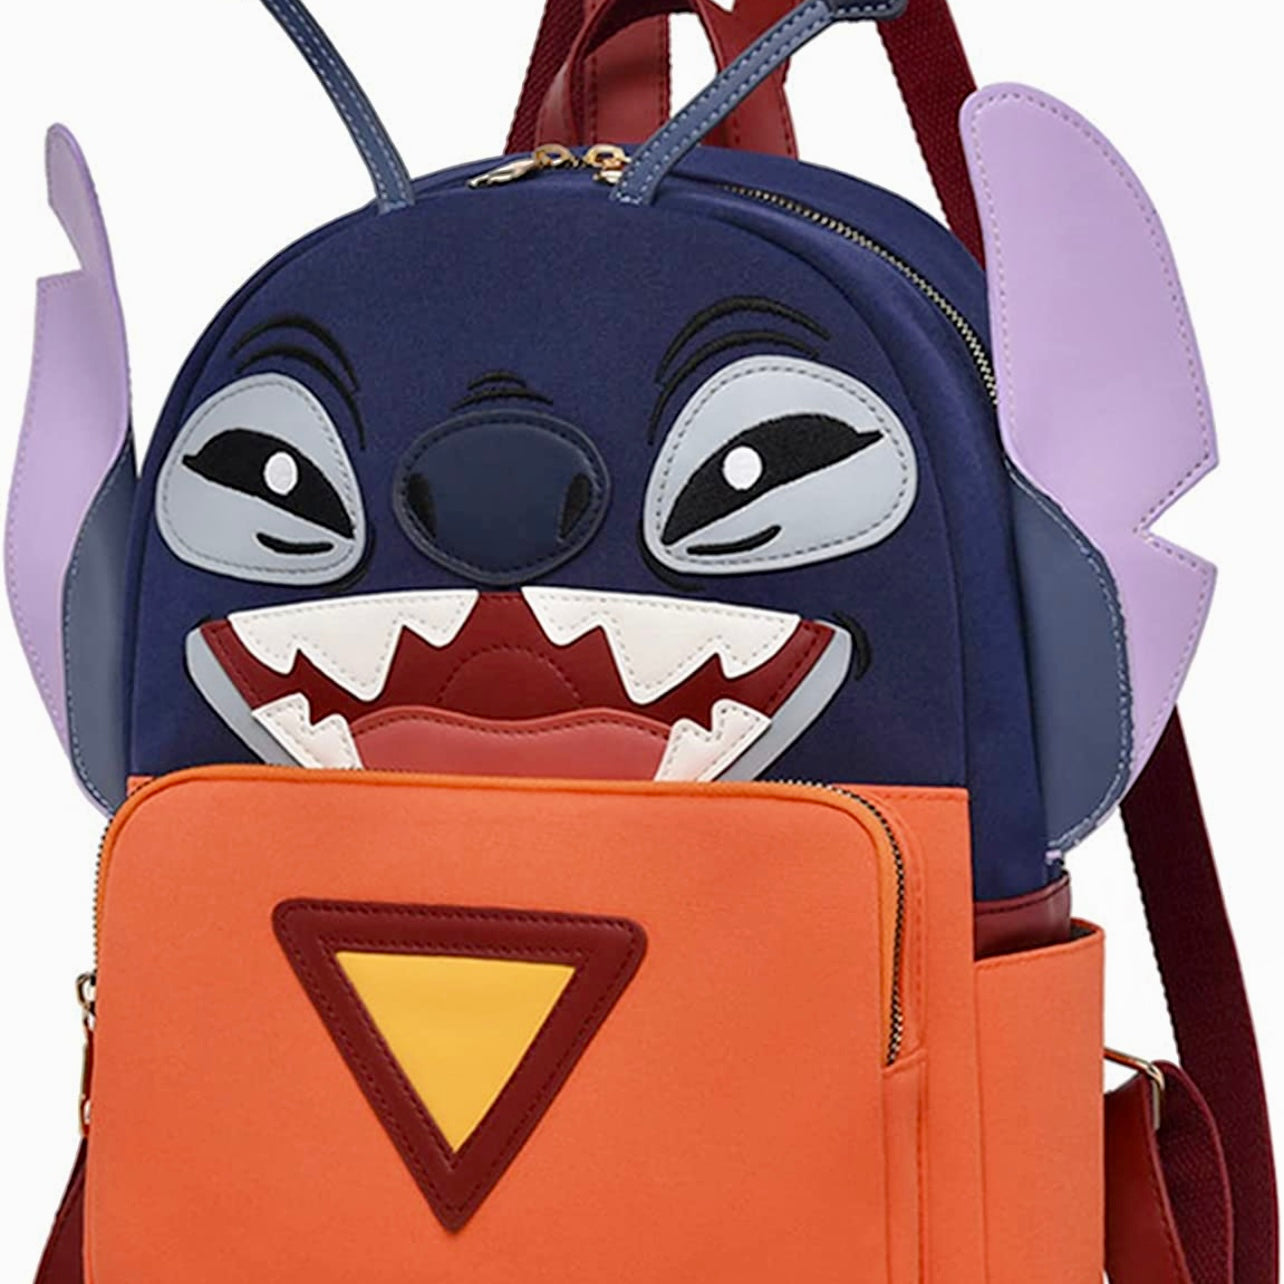 Stitch Gifts Lilo and Stitch Bag Lilo & Stitch Pastel Pink Hand Bag w/ Matching Adjustable Shoulder Strap & Free Matching Gift for New Customers (